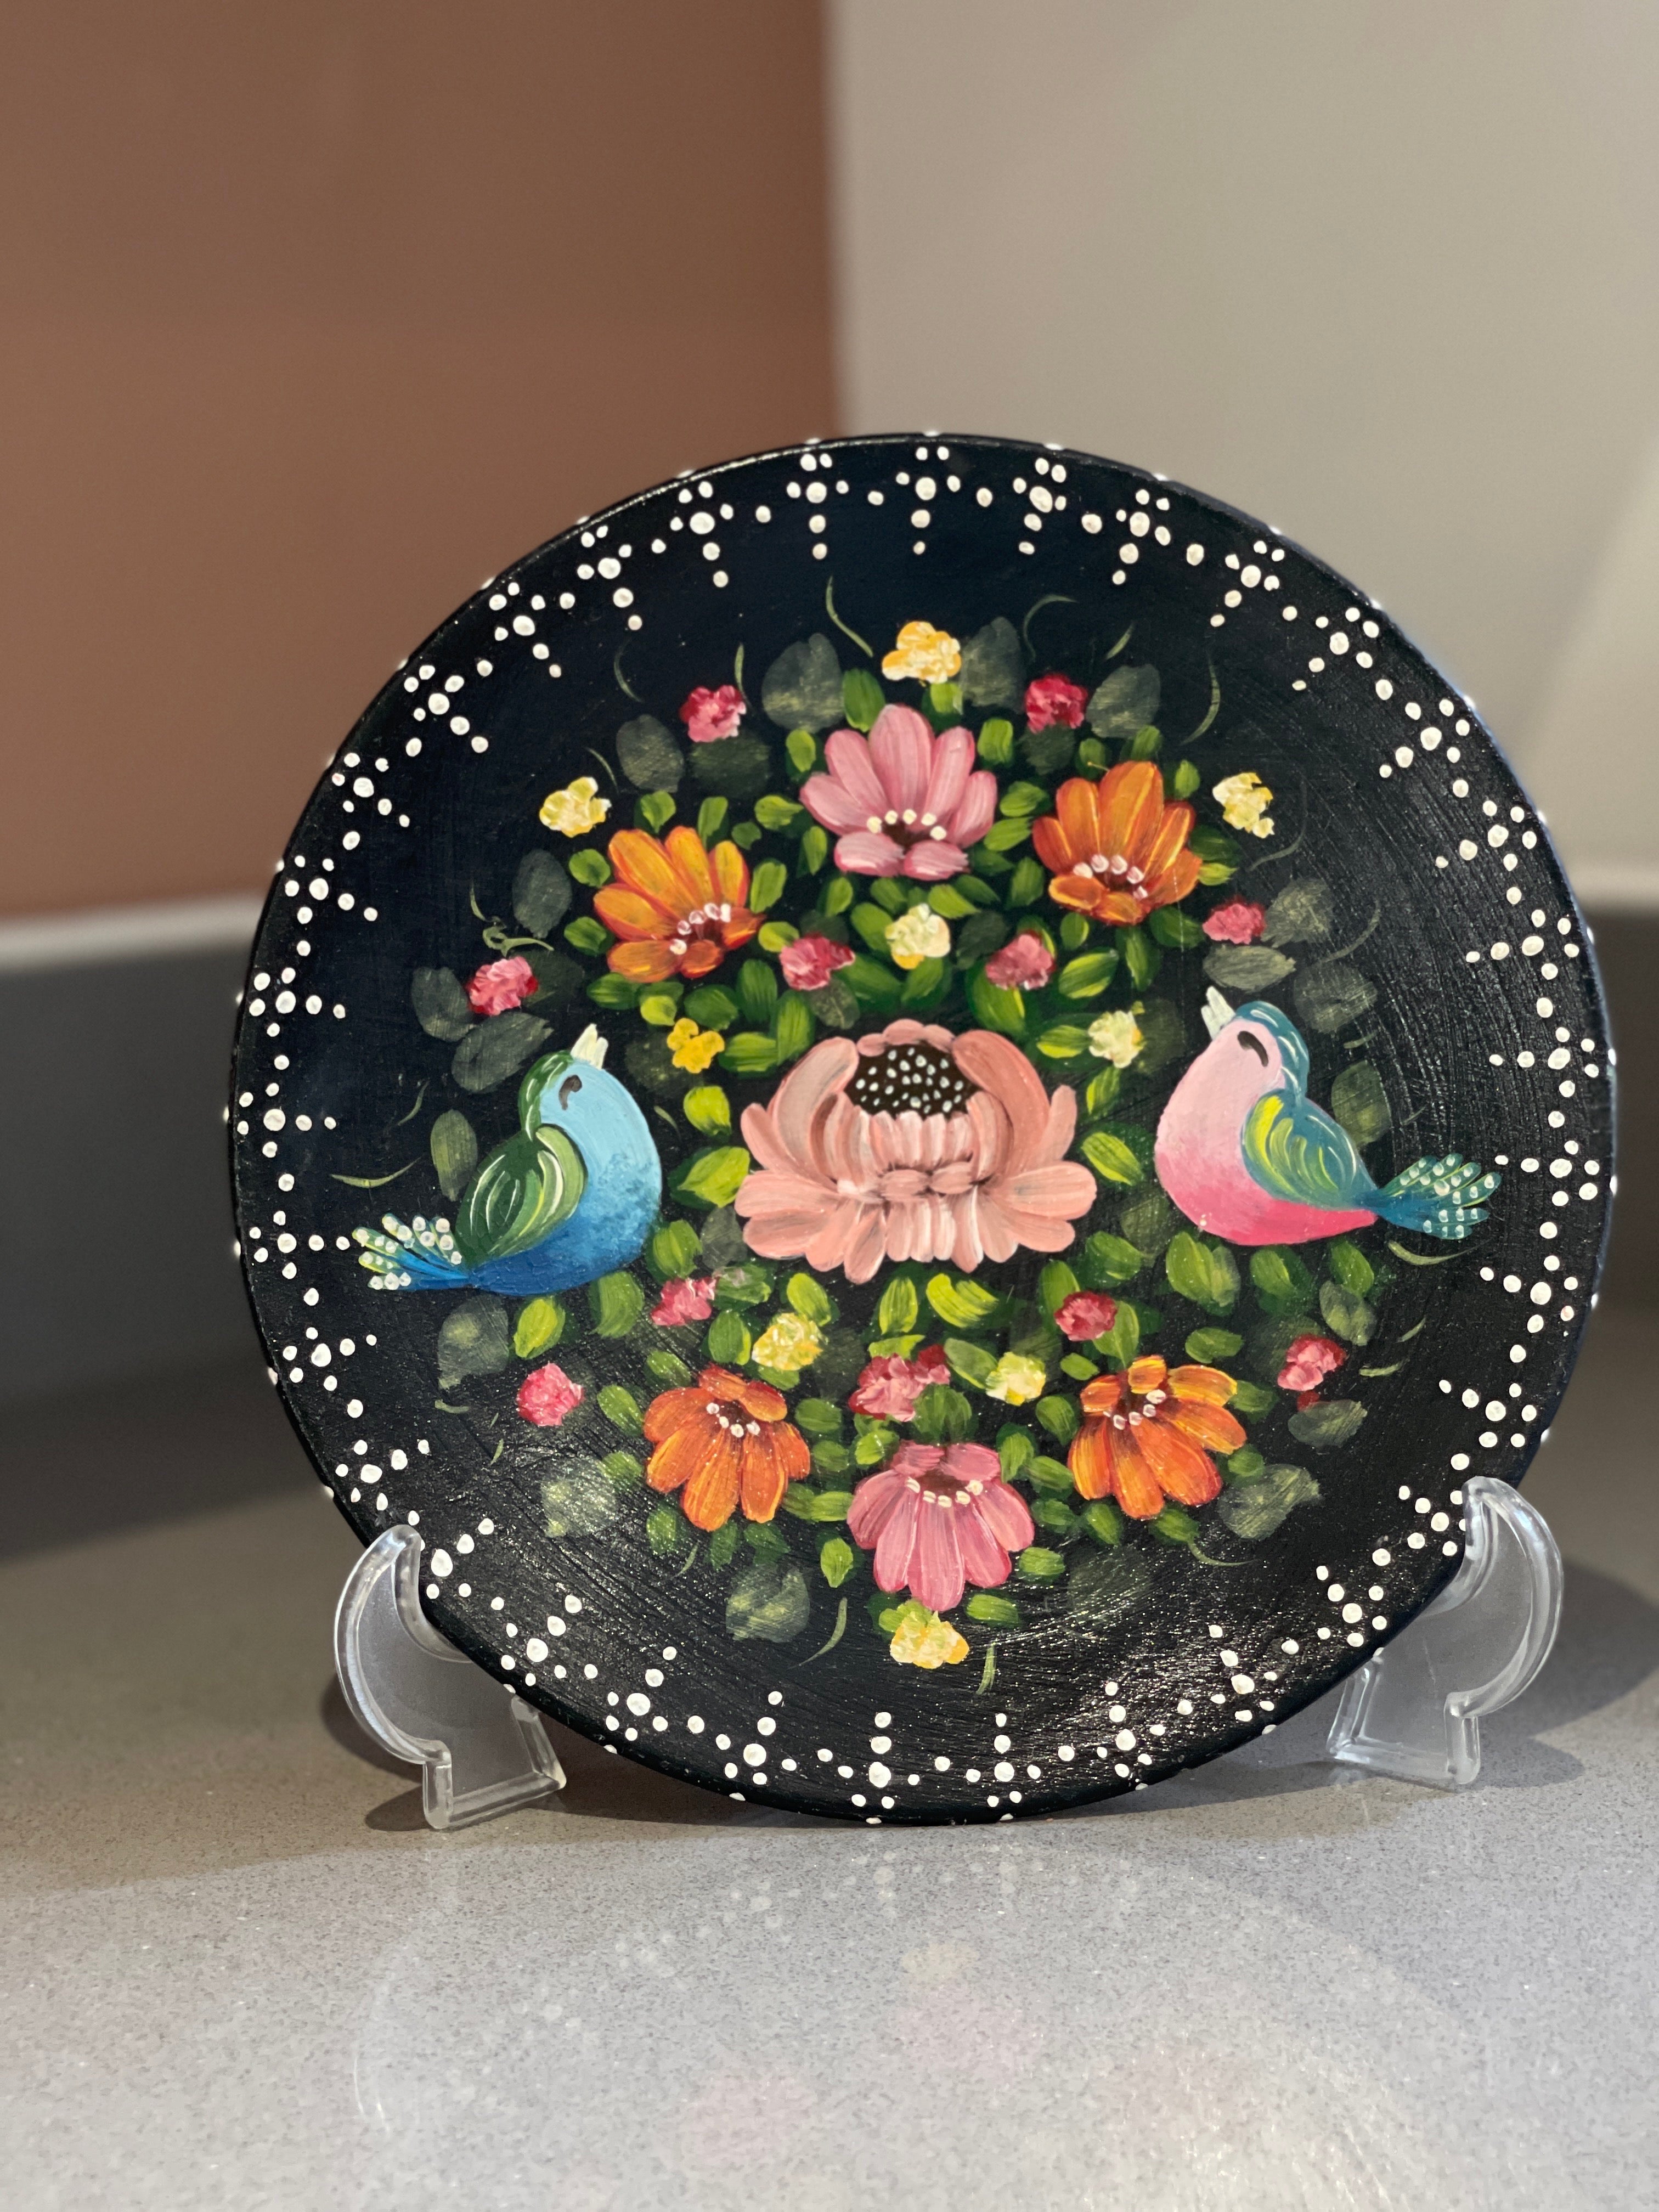 Satinwood vintage decorative art and craft style plates, Oriental flowers and chicken hand-painting wall decorations are gorgeous decorative objects for your home decor.
Impressive multicolour painting on the black background and outstanding